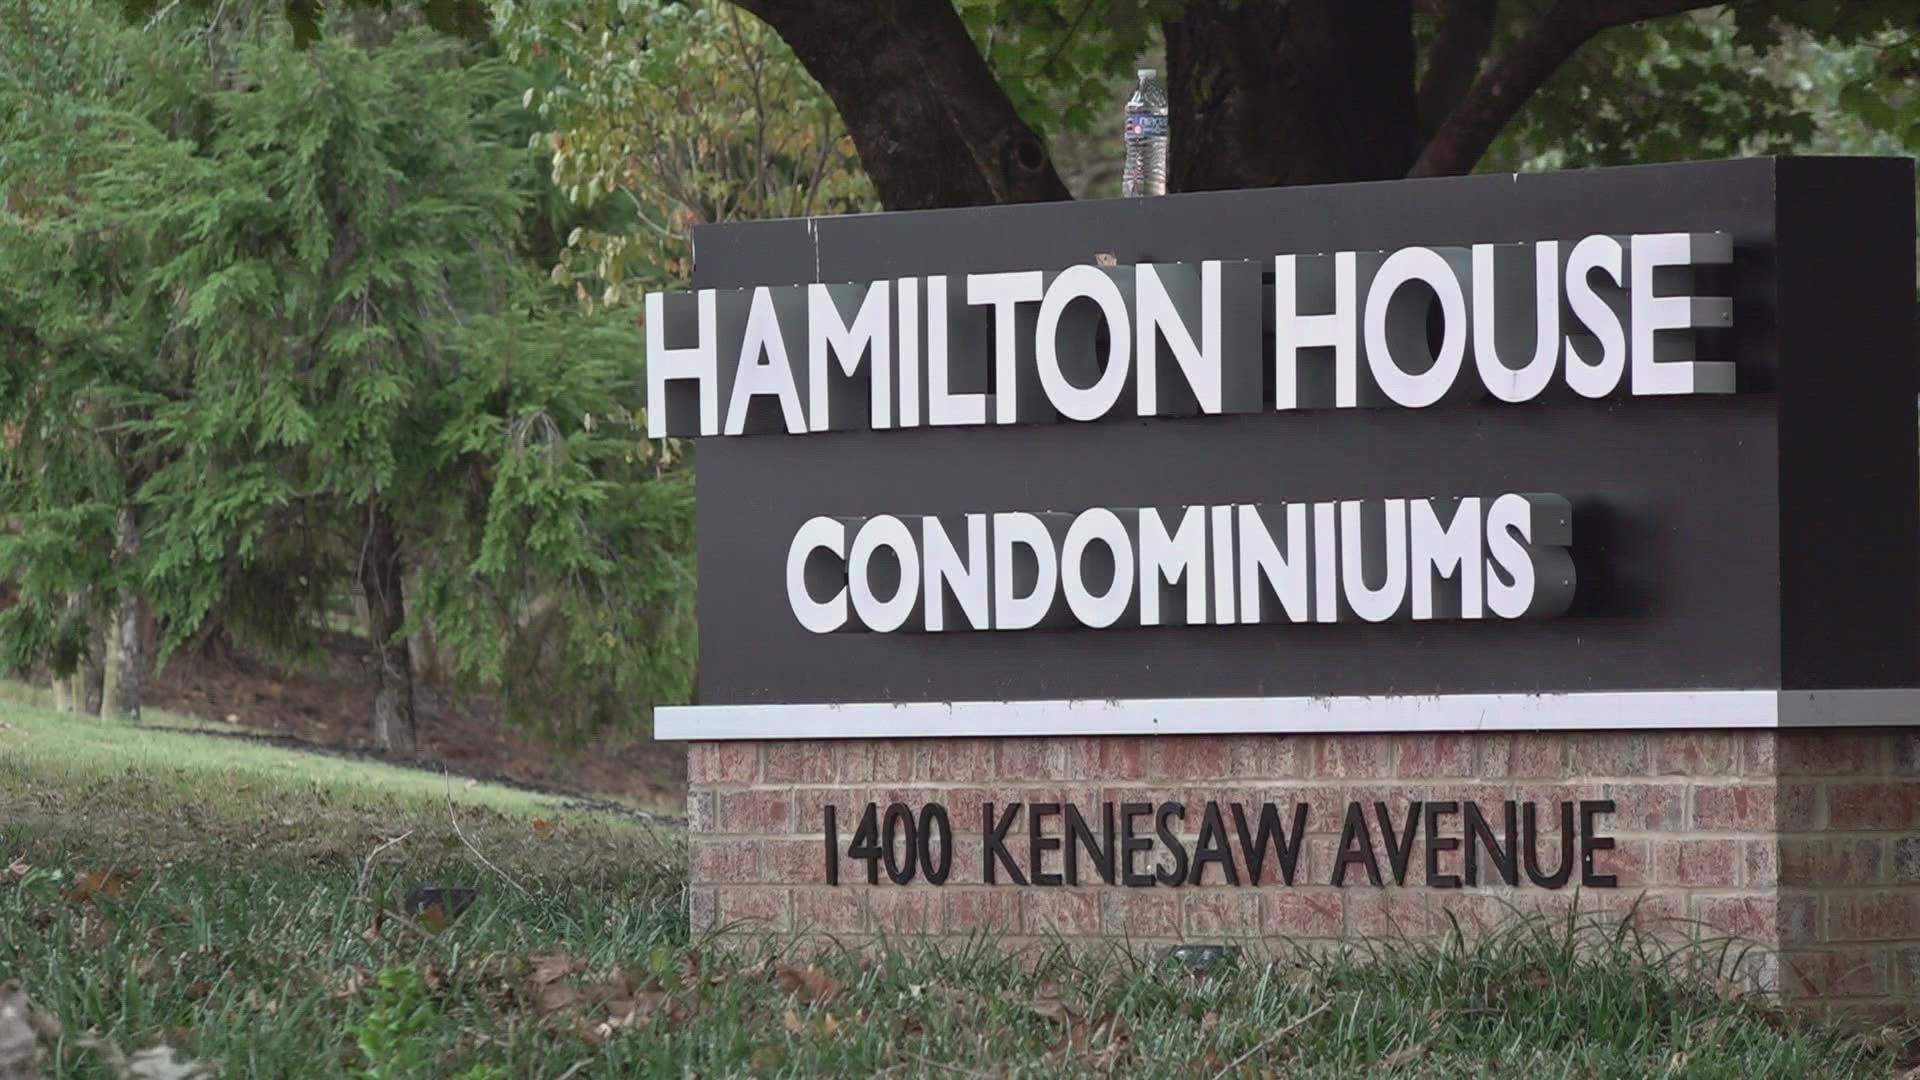 Knoxville fire crews responded to an emergency call around 5:48 p.m. at Hamilton House Condos on Kenesaw Avenue.